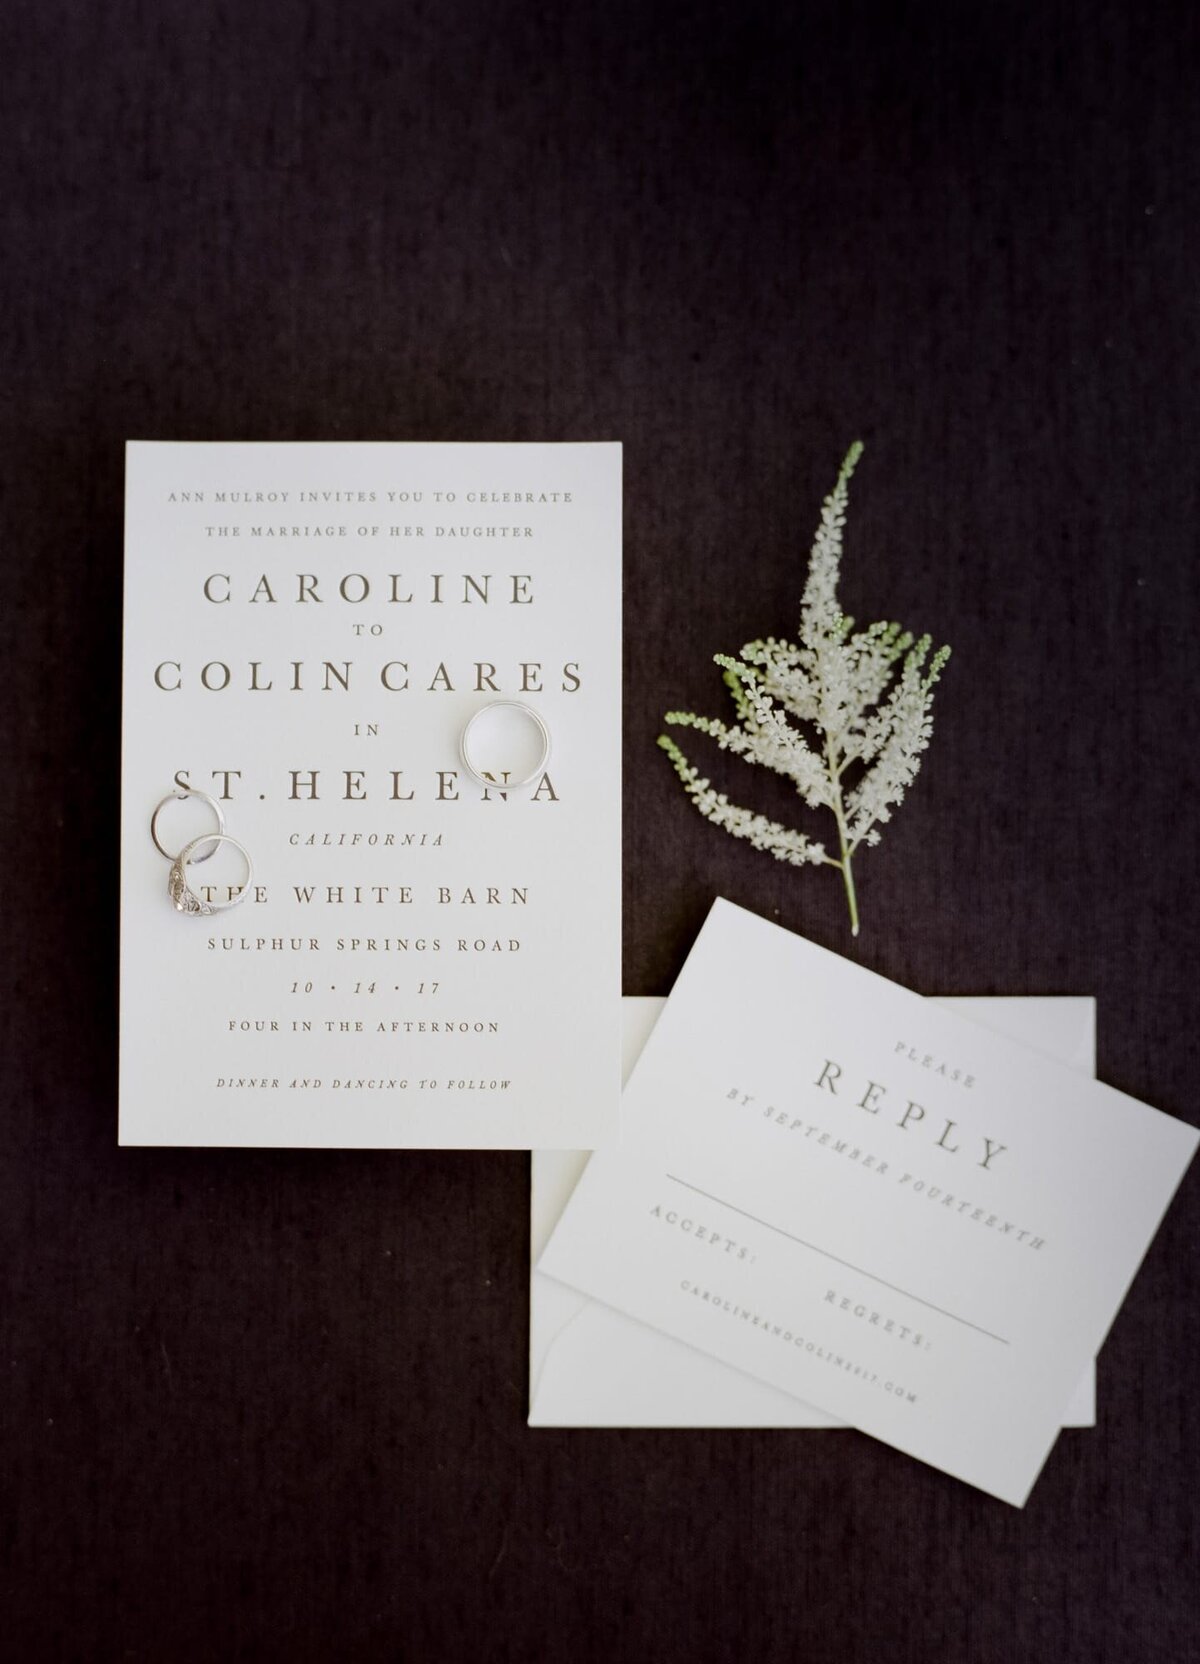 Aesthetic and minimal wedding invitation cards with confirmation card.